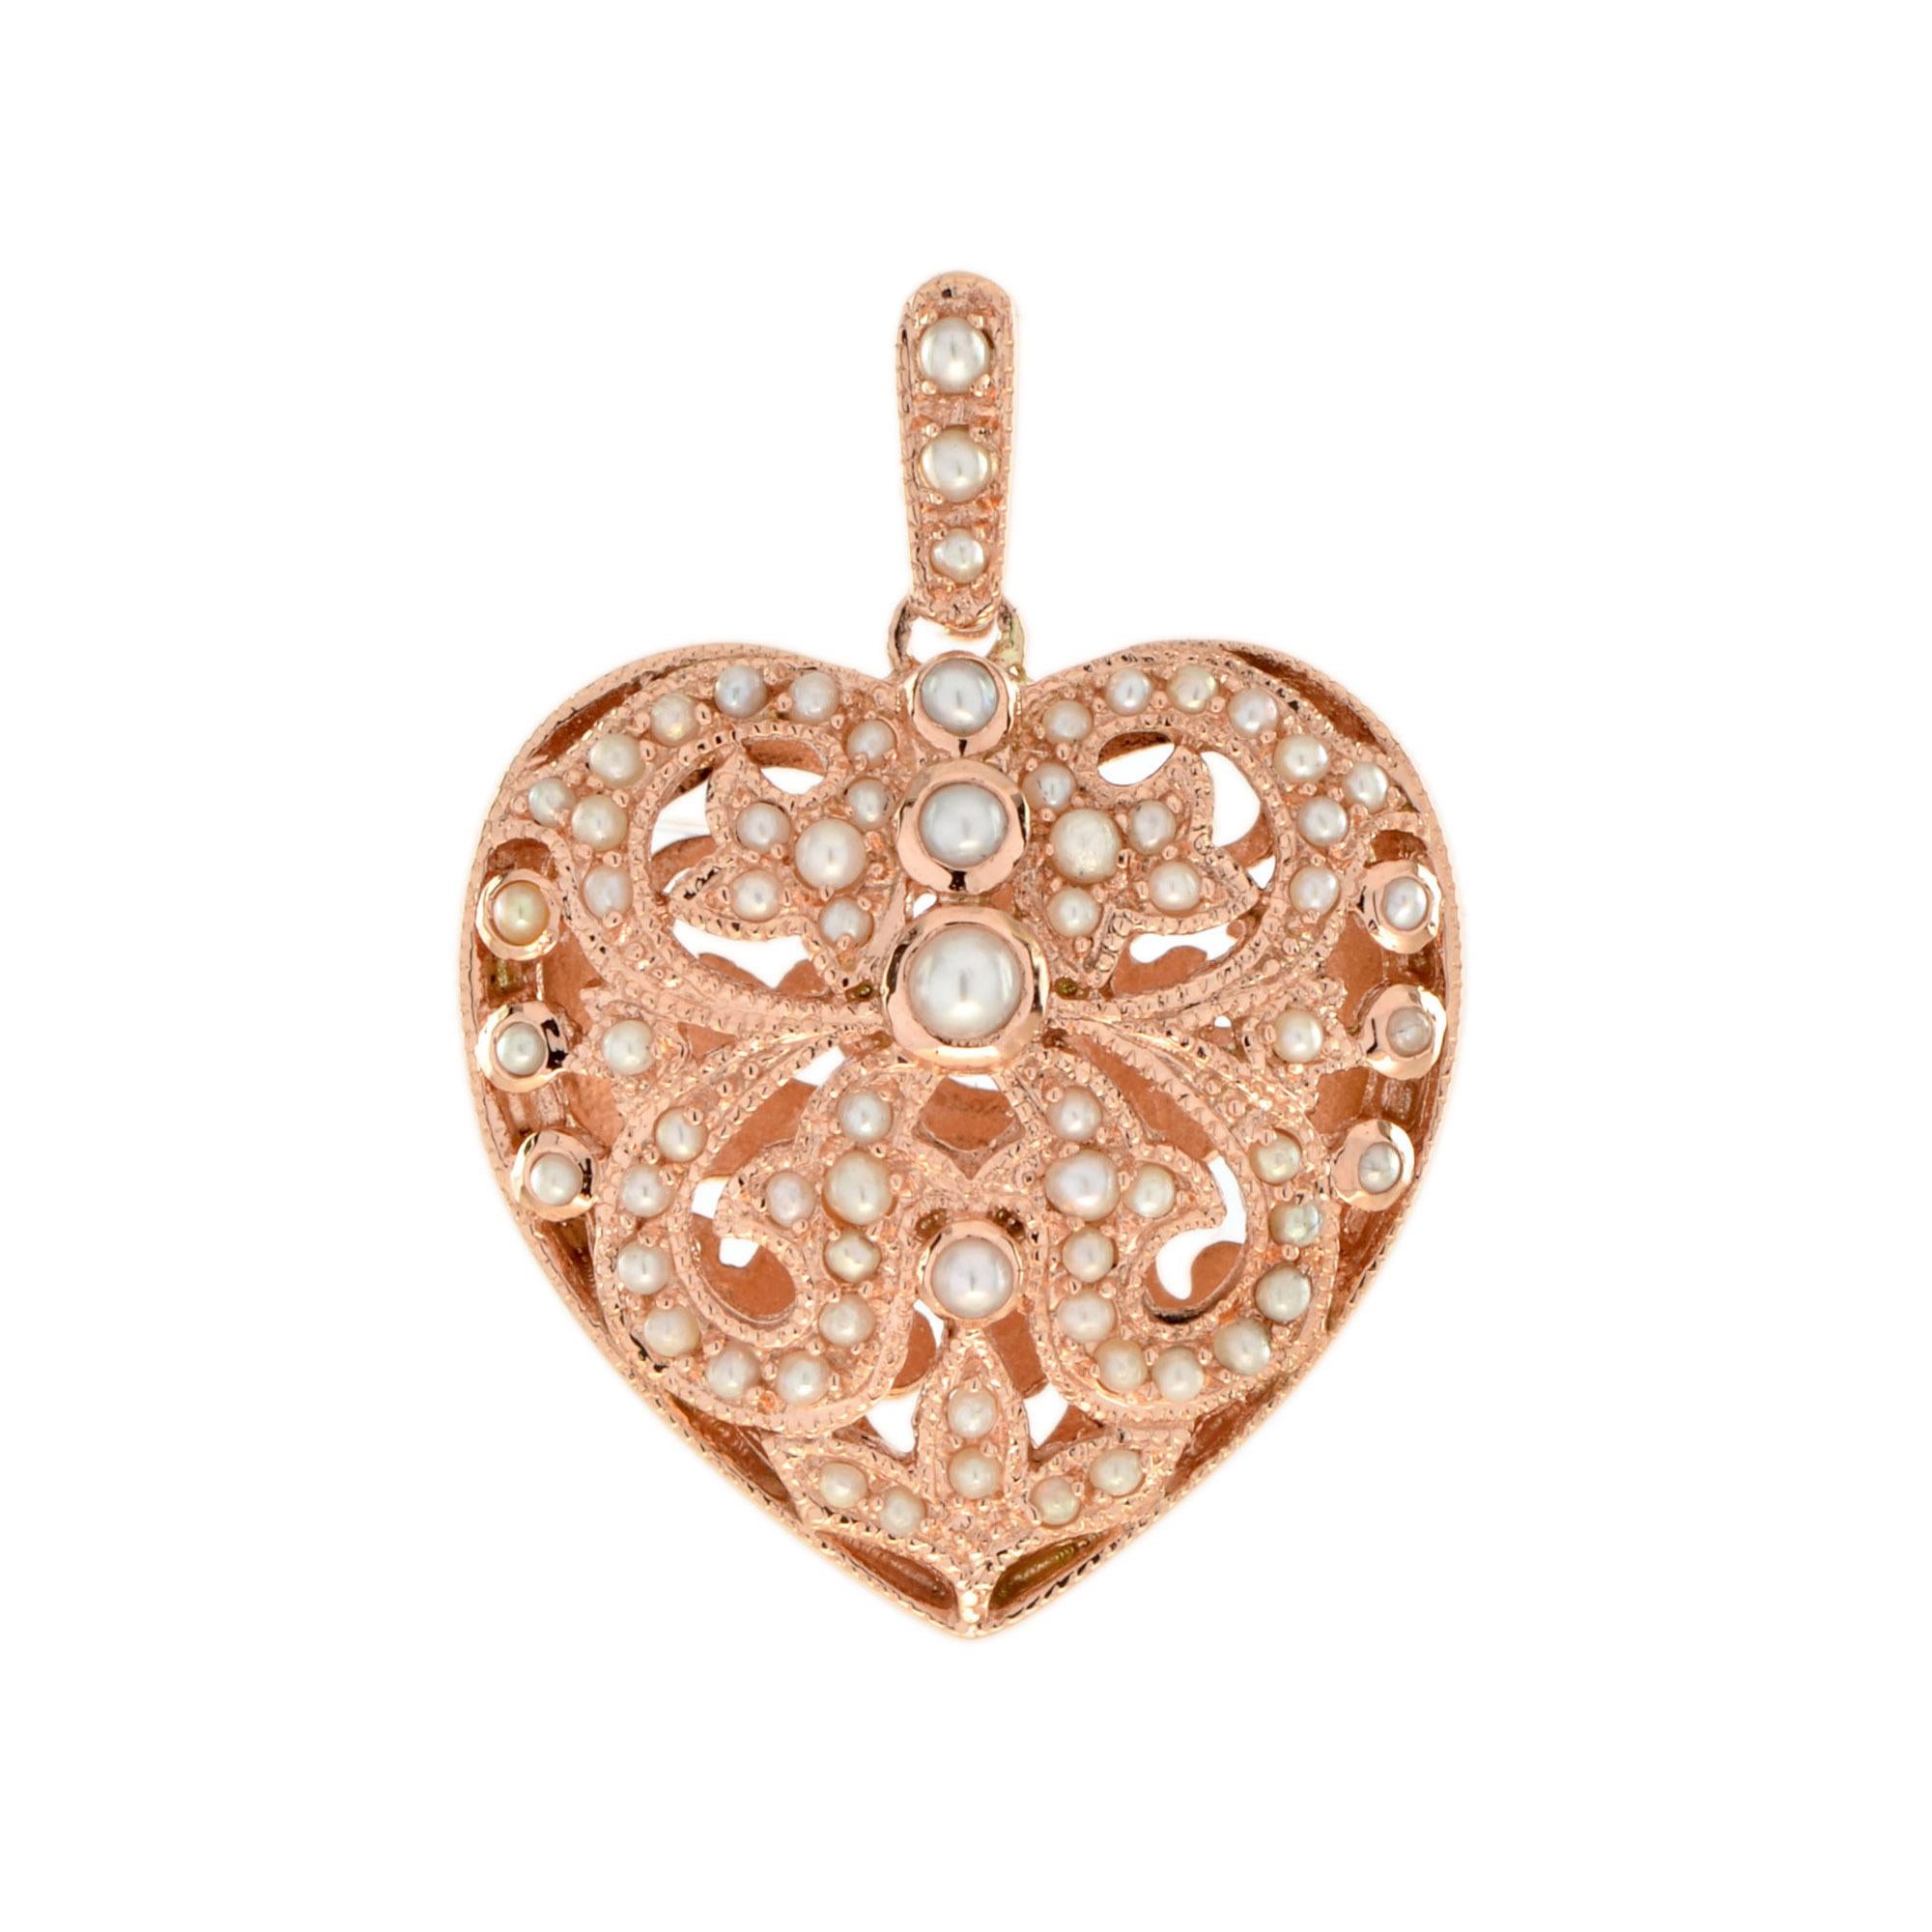 Natural Fresh Water Pearl Vintage Style Filigree Heart Pendant in 14K Rose Gold